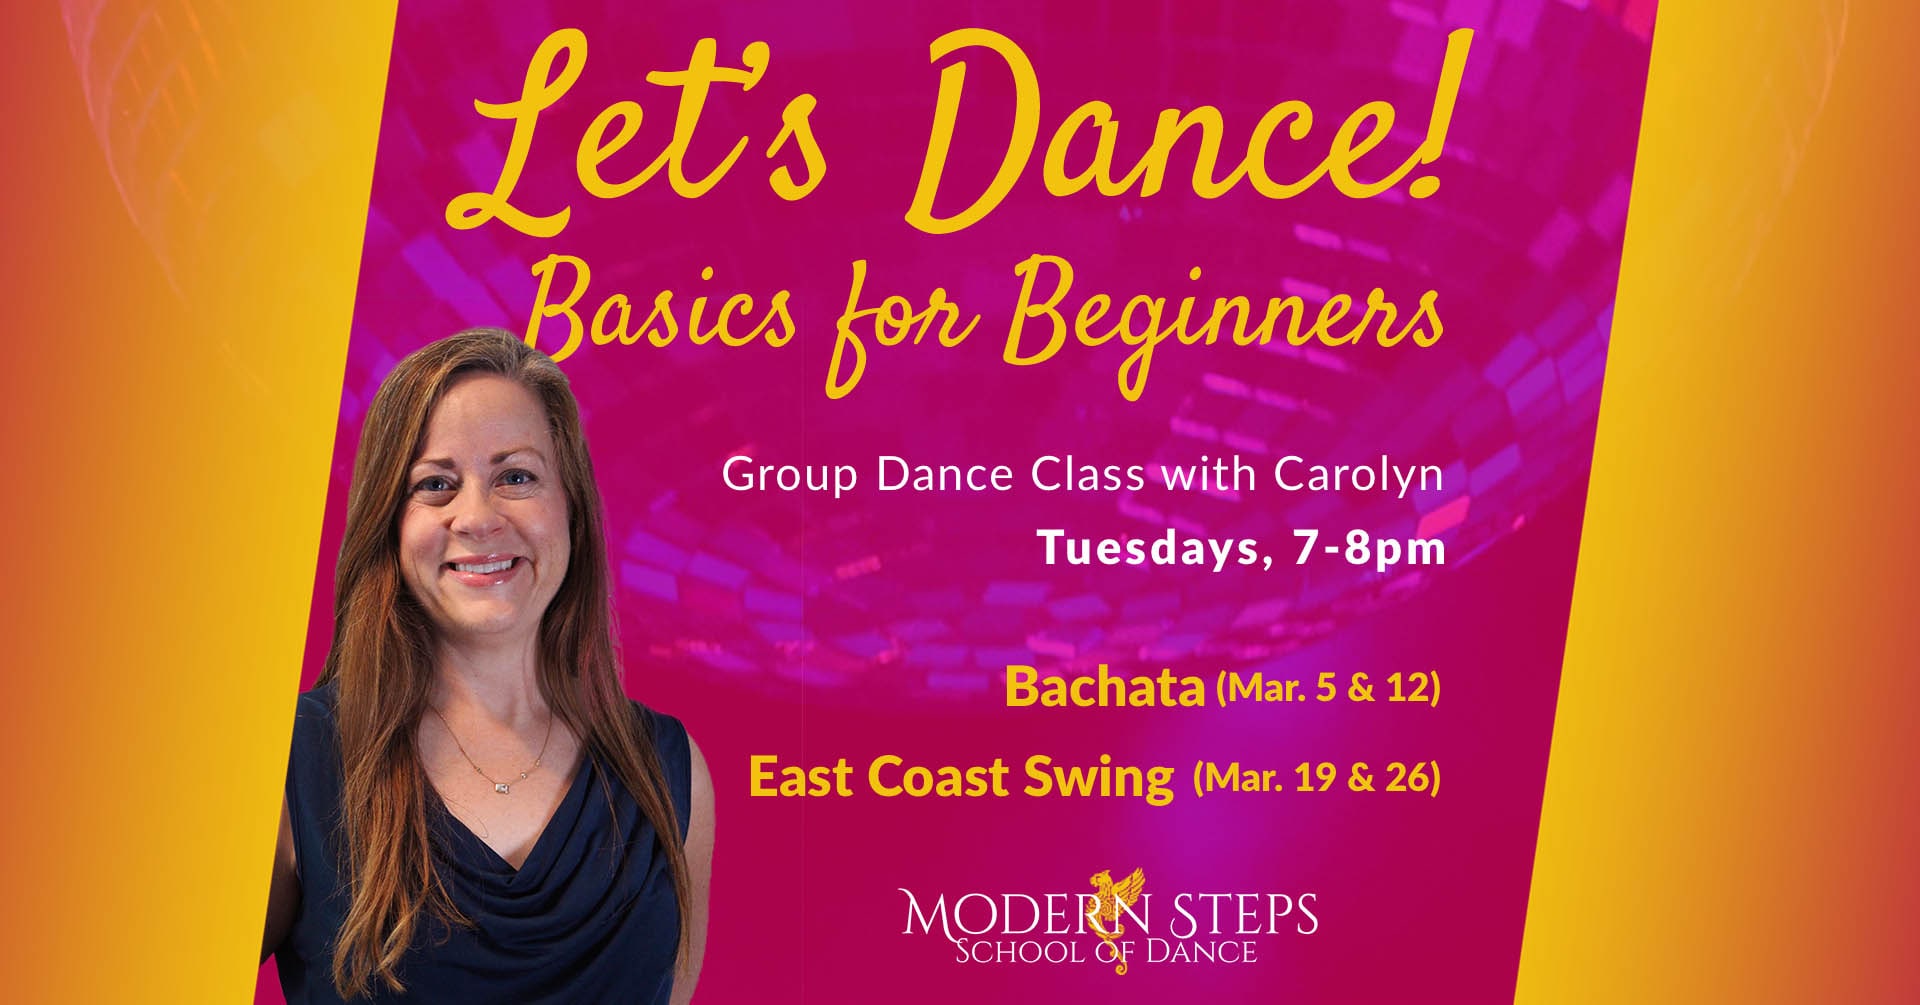 Modern Steps School of Dance Naples Florida Dance Classes - Group Ballroom Dance Lessons - Naples Florida Things to Do -- Let's Dance! Basics for Beginners with Carolyn Bivens: Bachata & East Coast Swing Dance